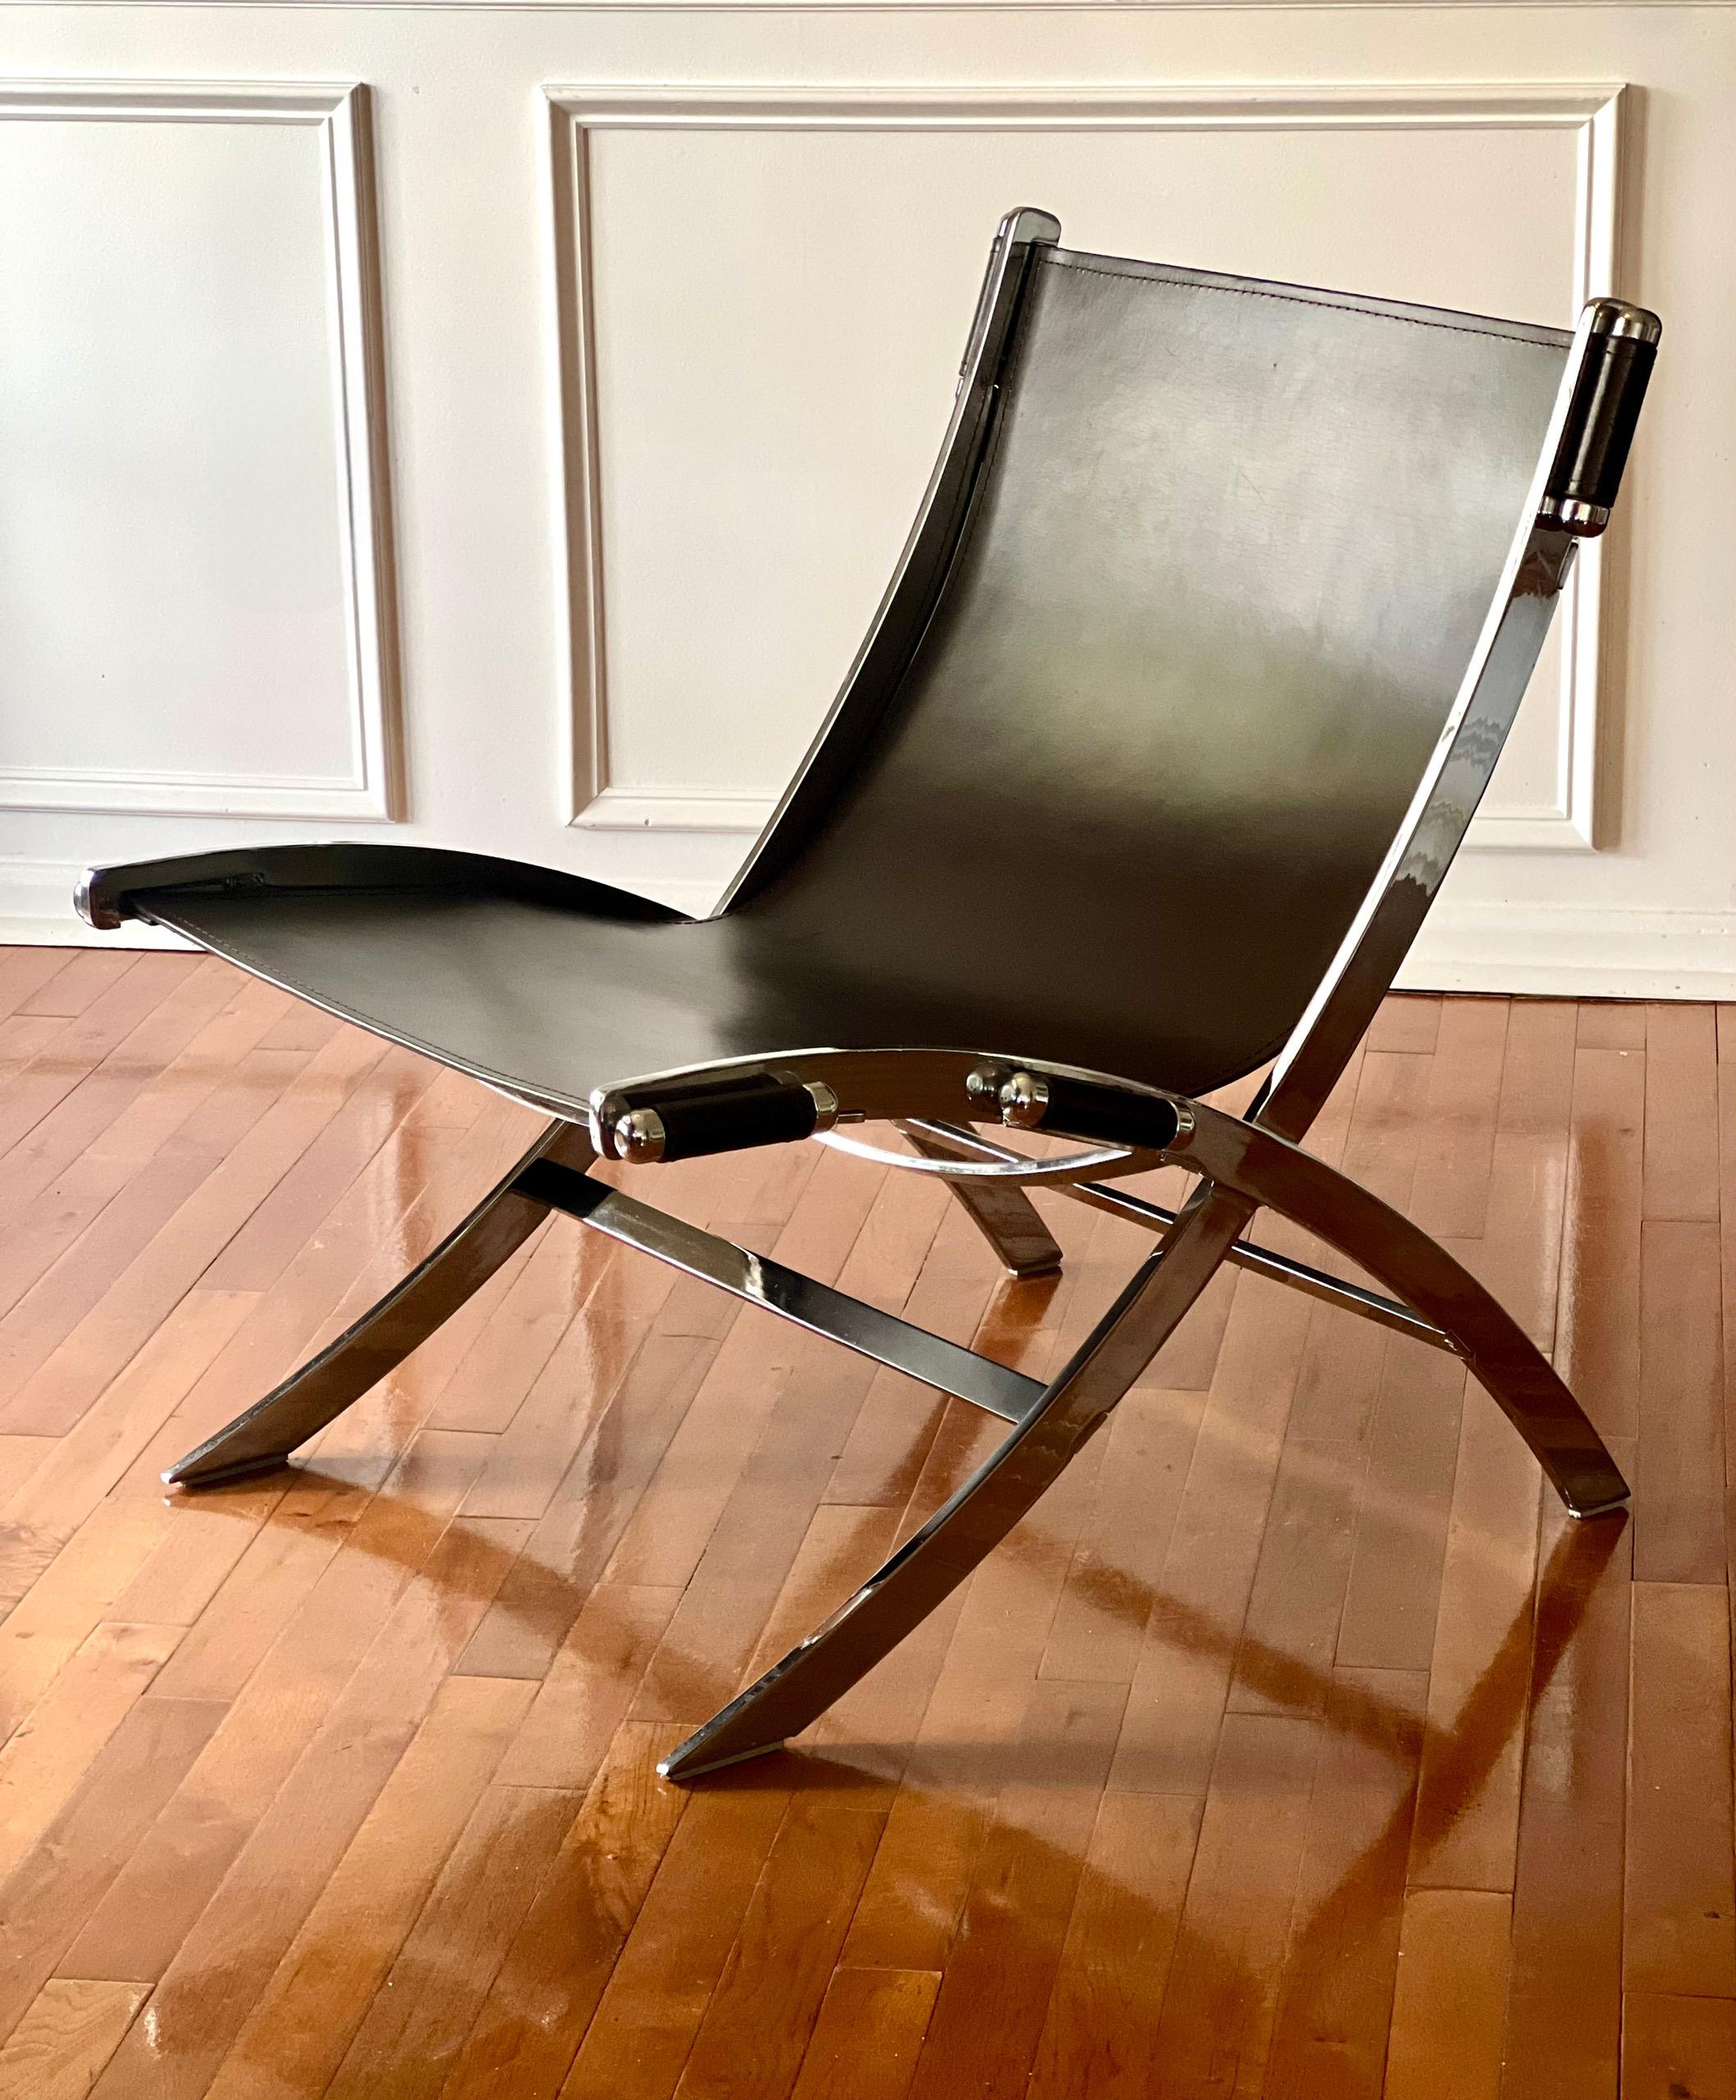 Post modern sling scissor lounge chair attributed to Antonio Citterio for Flexform. Model is named 